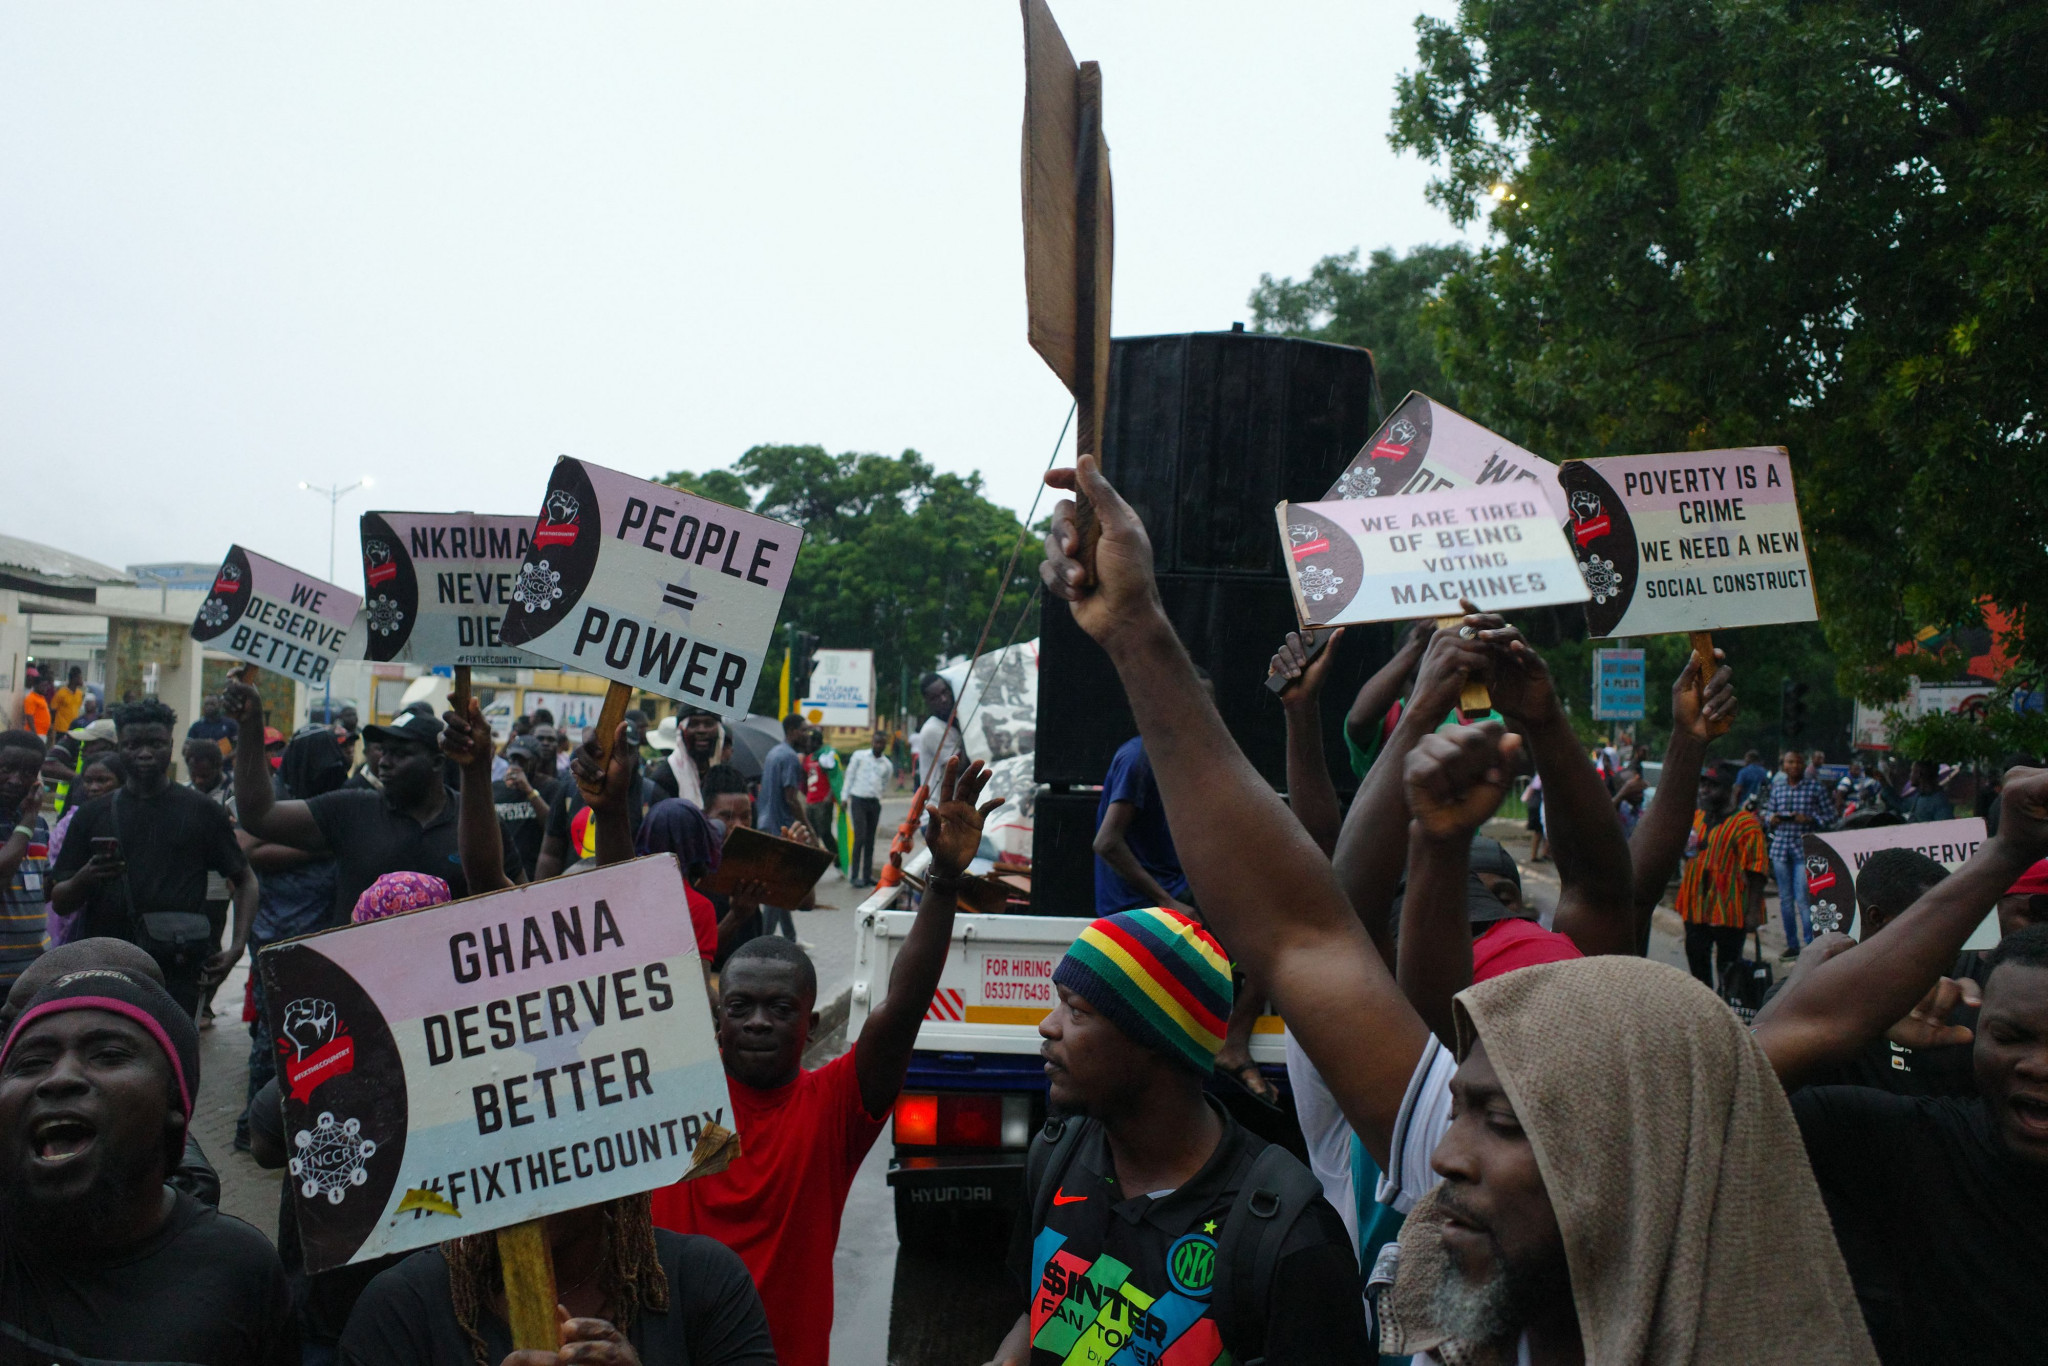 Fresh anti-Government protests were held in Ghana last month with the country facing ongoing financial issues ©Getty Images